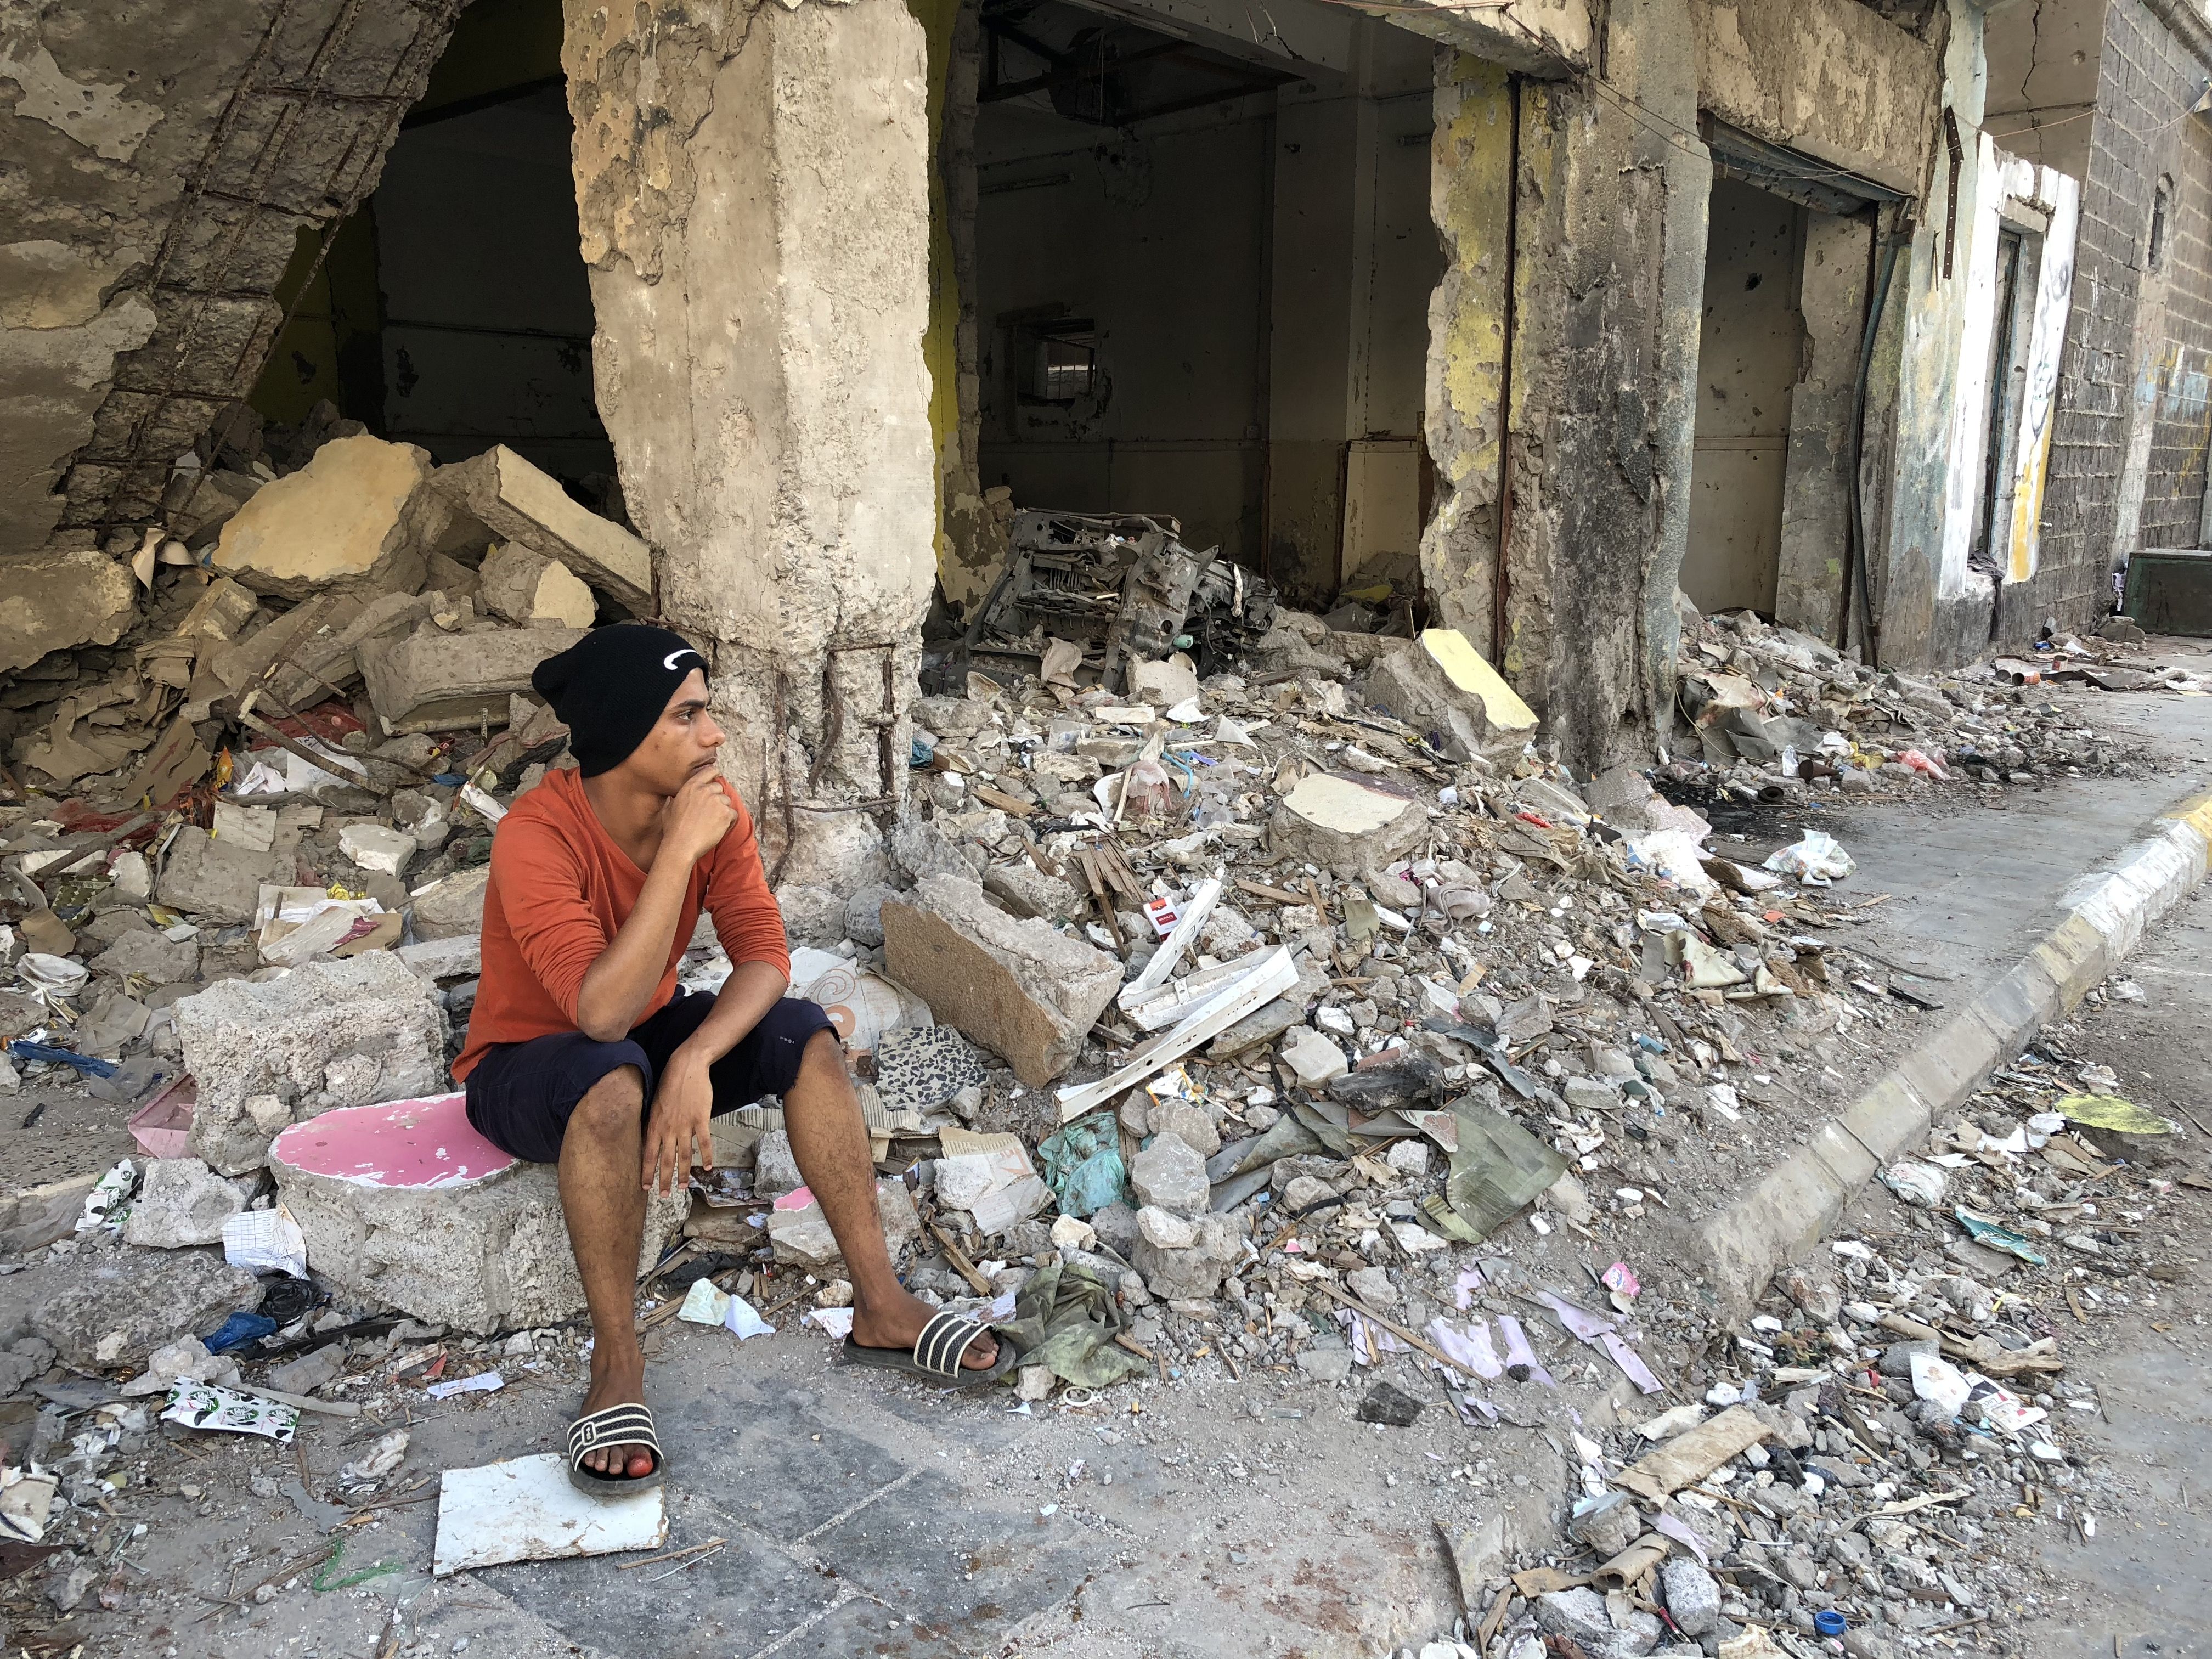 Moaad sits in the rubble of his home in the Kraytar district of Aden, hit so hard during the 2015 battle between government forces and Houthi rebels. Three years after the battle, this neighborhood, like so many in Aden, has never been rebuilt. Image by Marcia Biggs. Yemen, 2018.